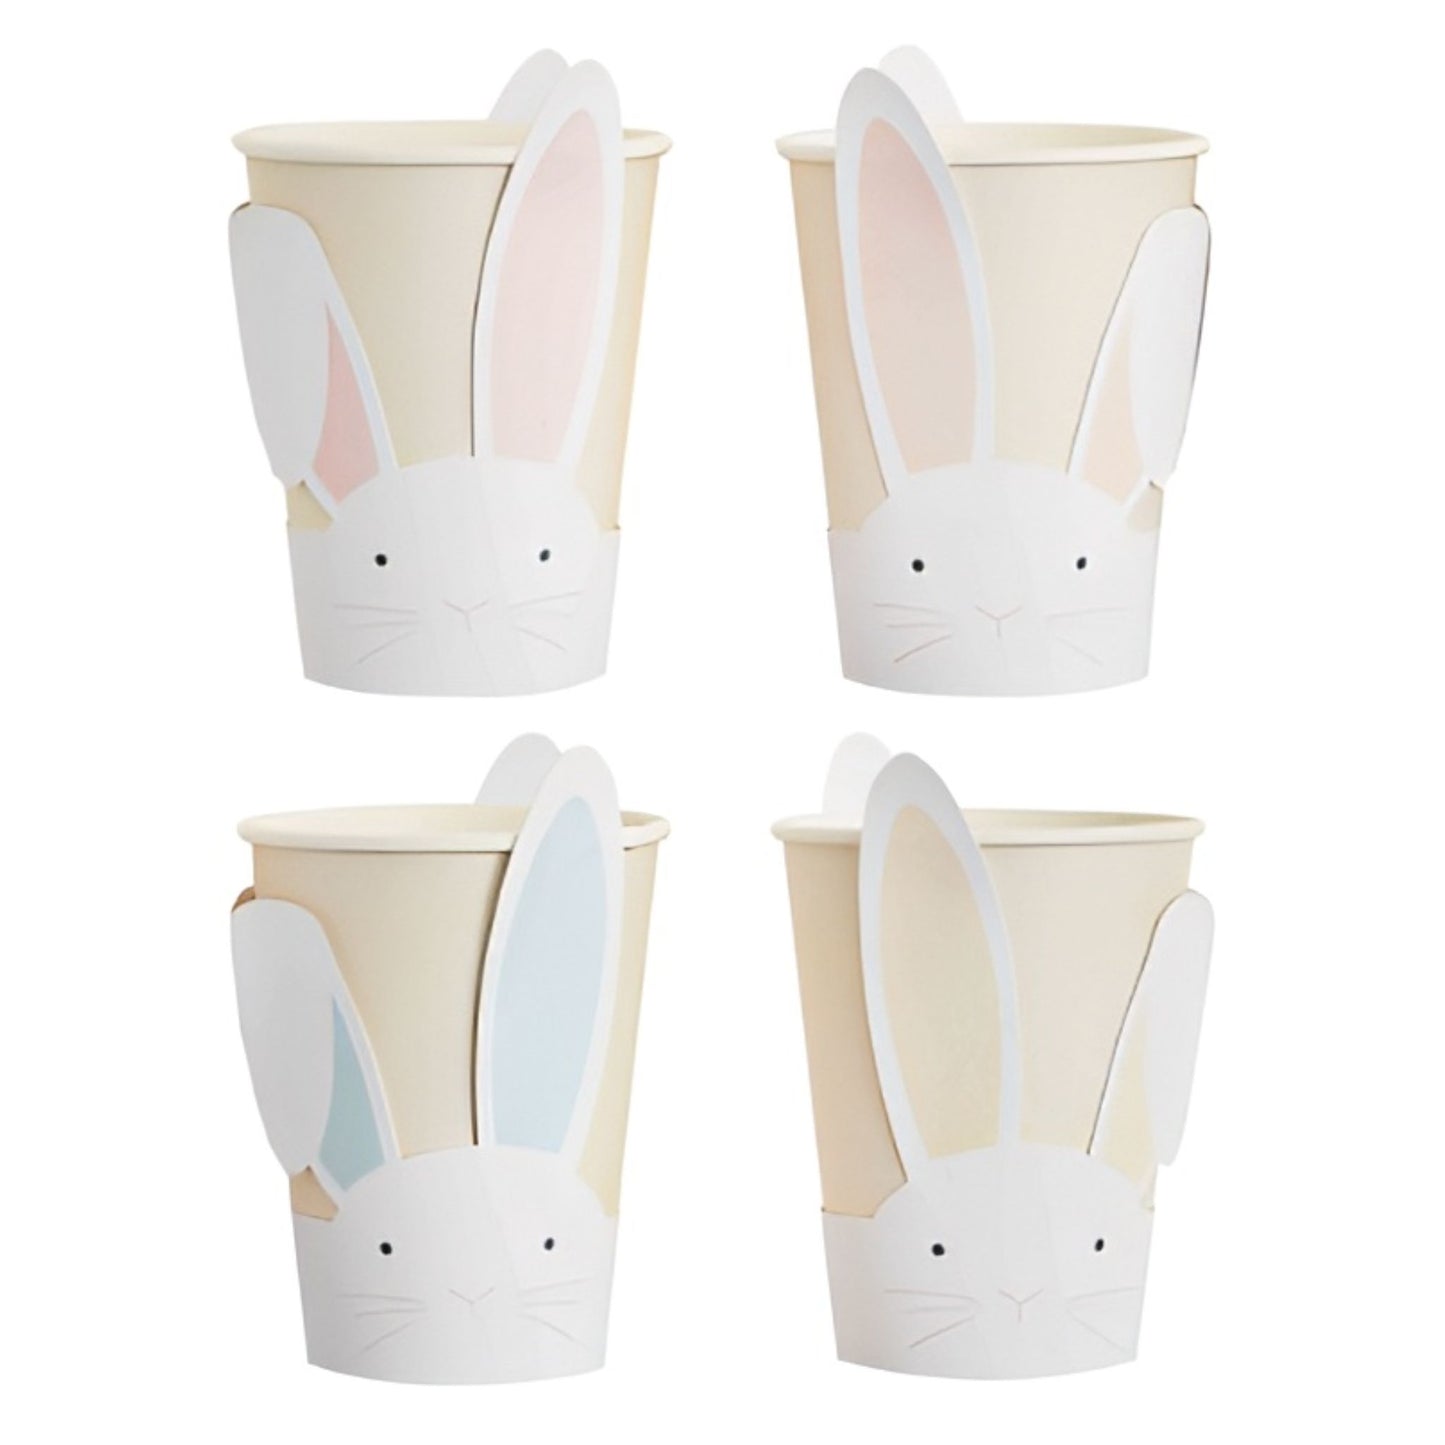 Adorable Easter Bunny Cups with bunny face and ears at front of cup in pastel colours